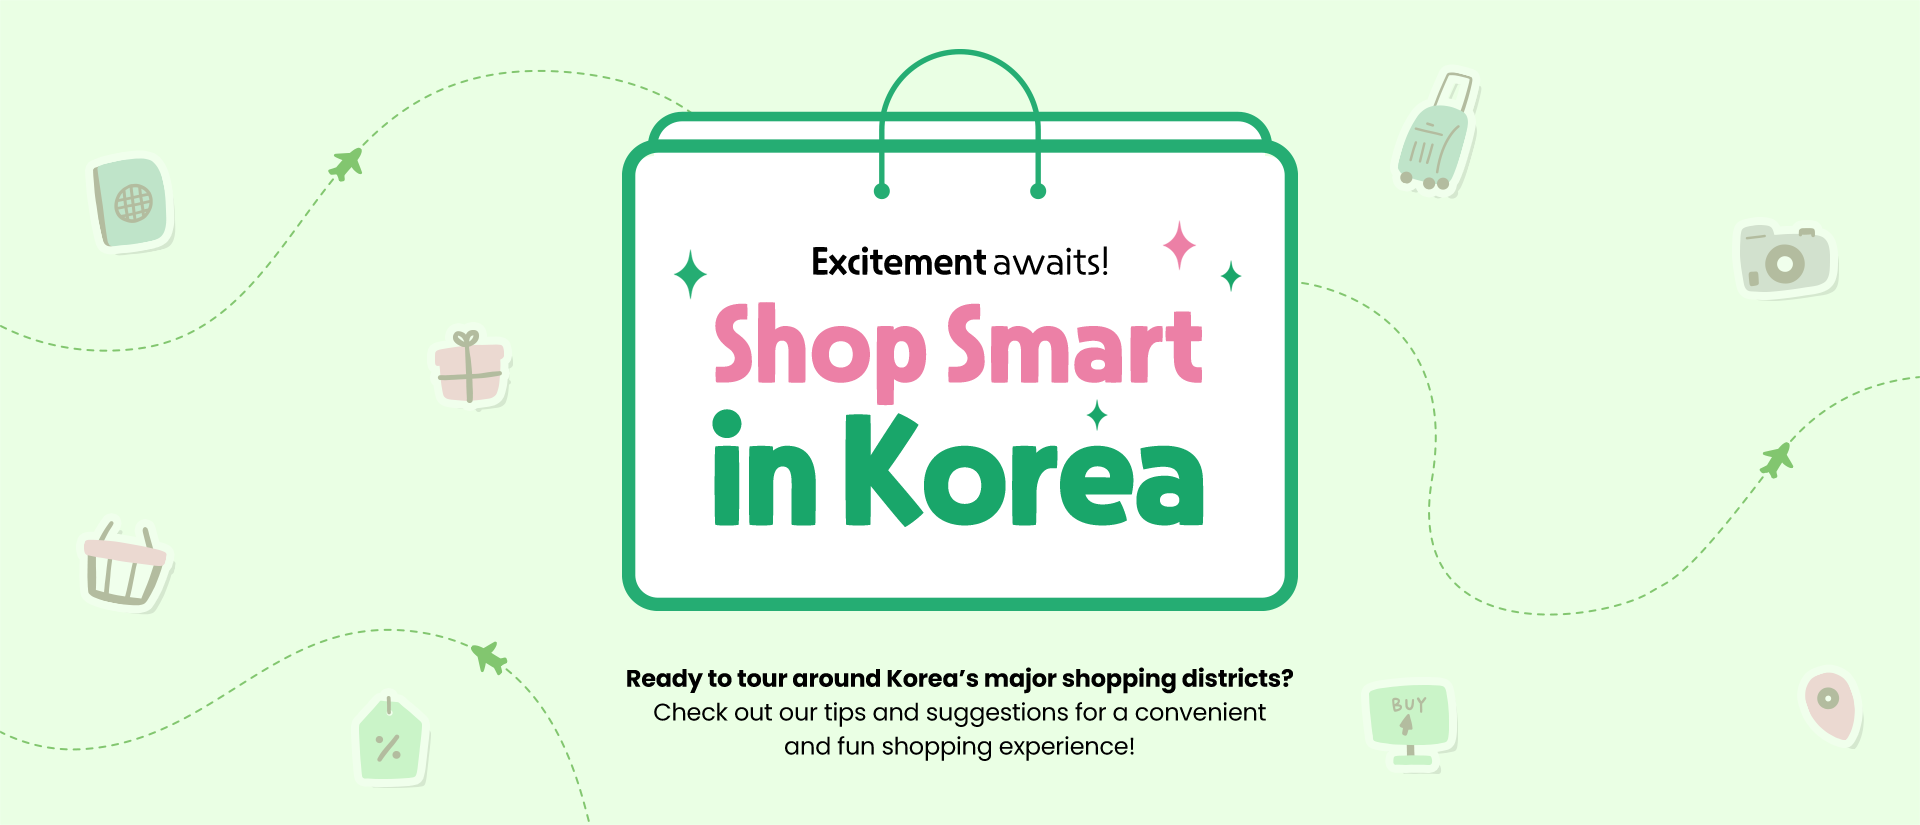 Excitement awaits! Shop Smart in Korea Ready to tour around Korea’s major shopping districts? Check out our tips and suggestions for a convenient and fun shopping experience!